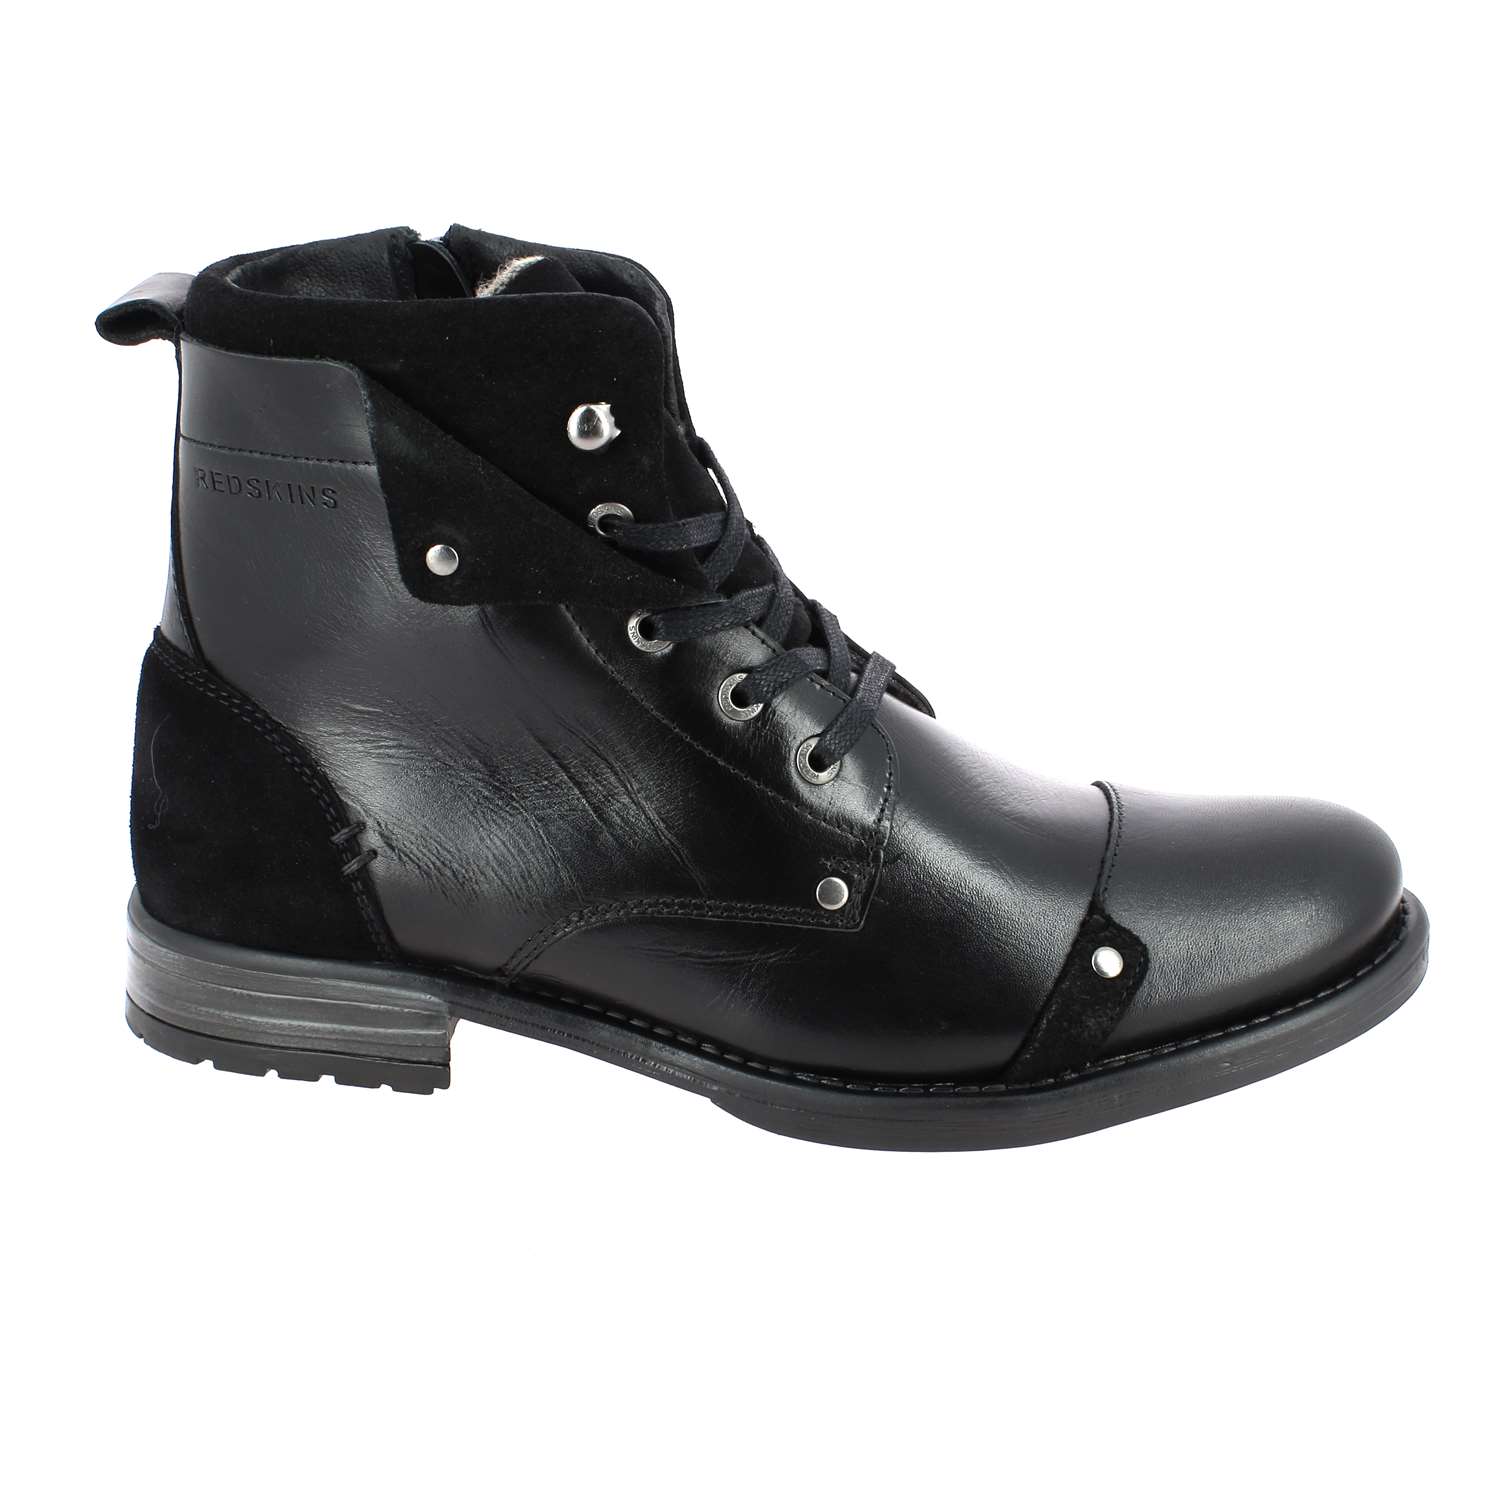 02 - YEDOS -  - Boots et bottines - Cuir